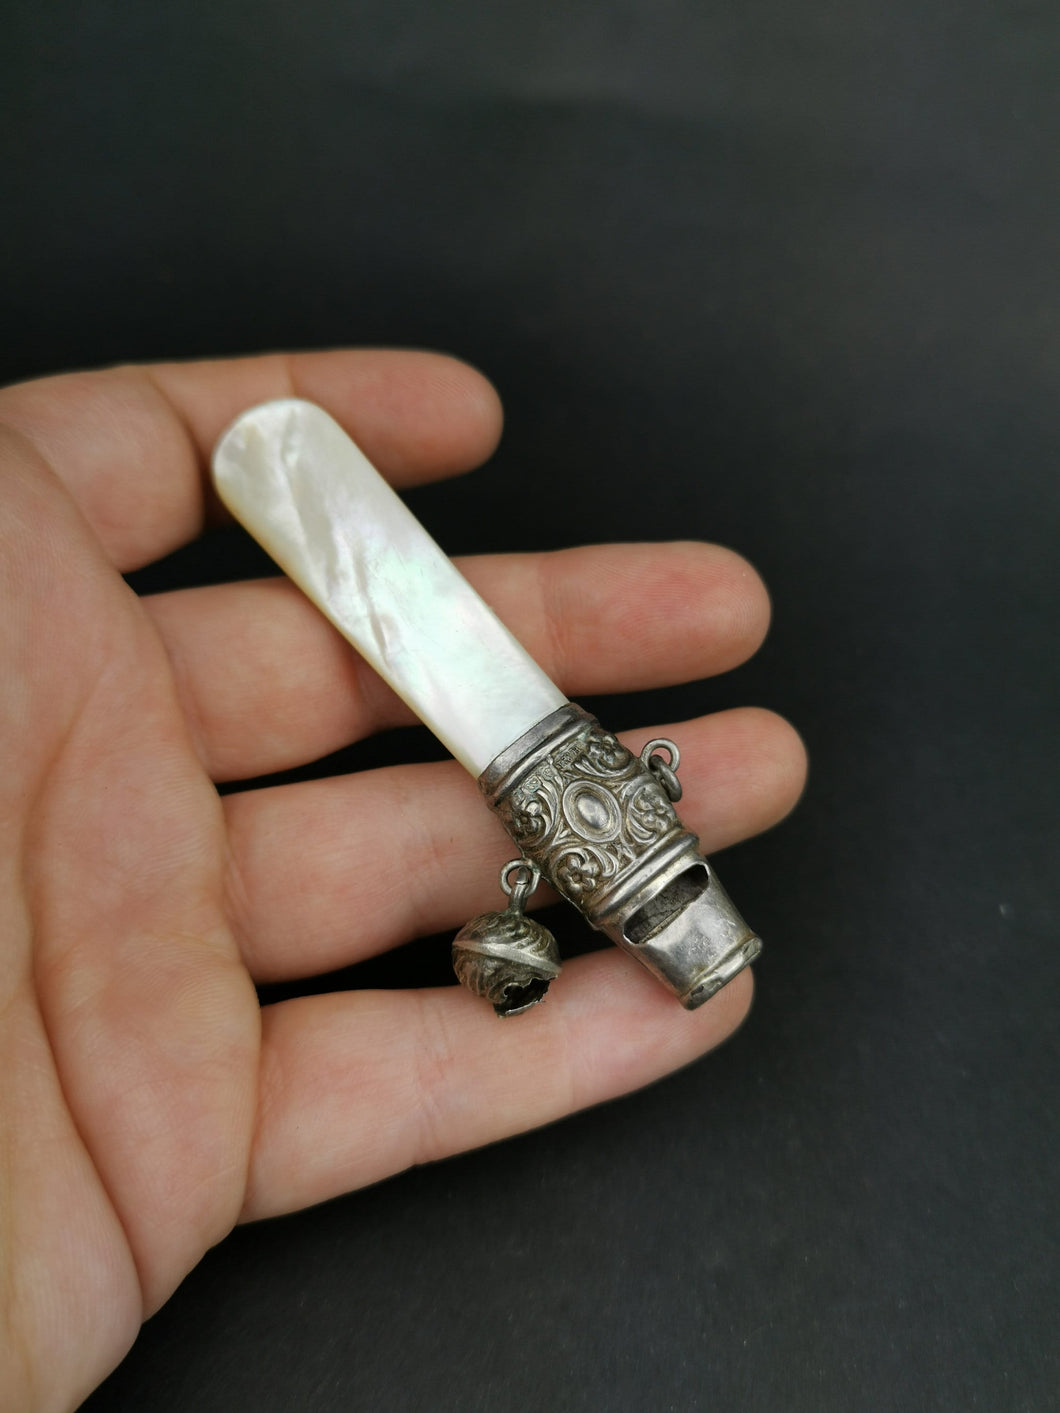 Antique Ladies Whistle Silver Metal and Mother of Pearl Shell Victorian Late 1800's Original